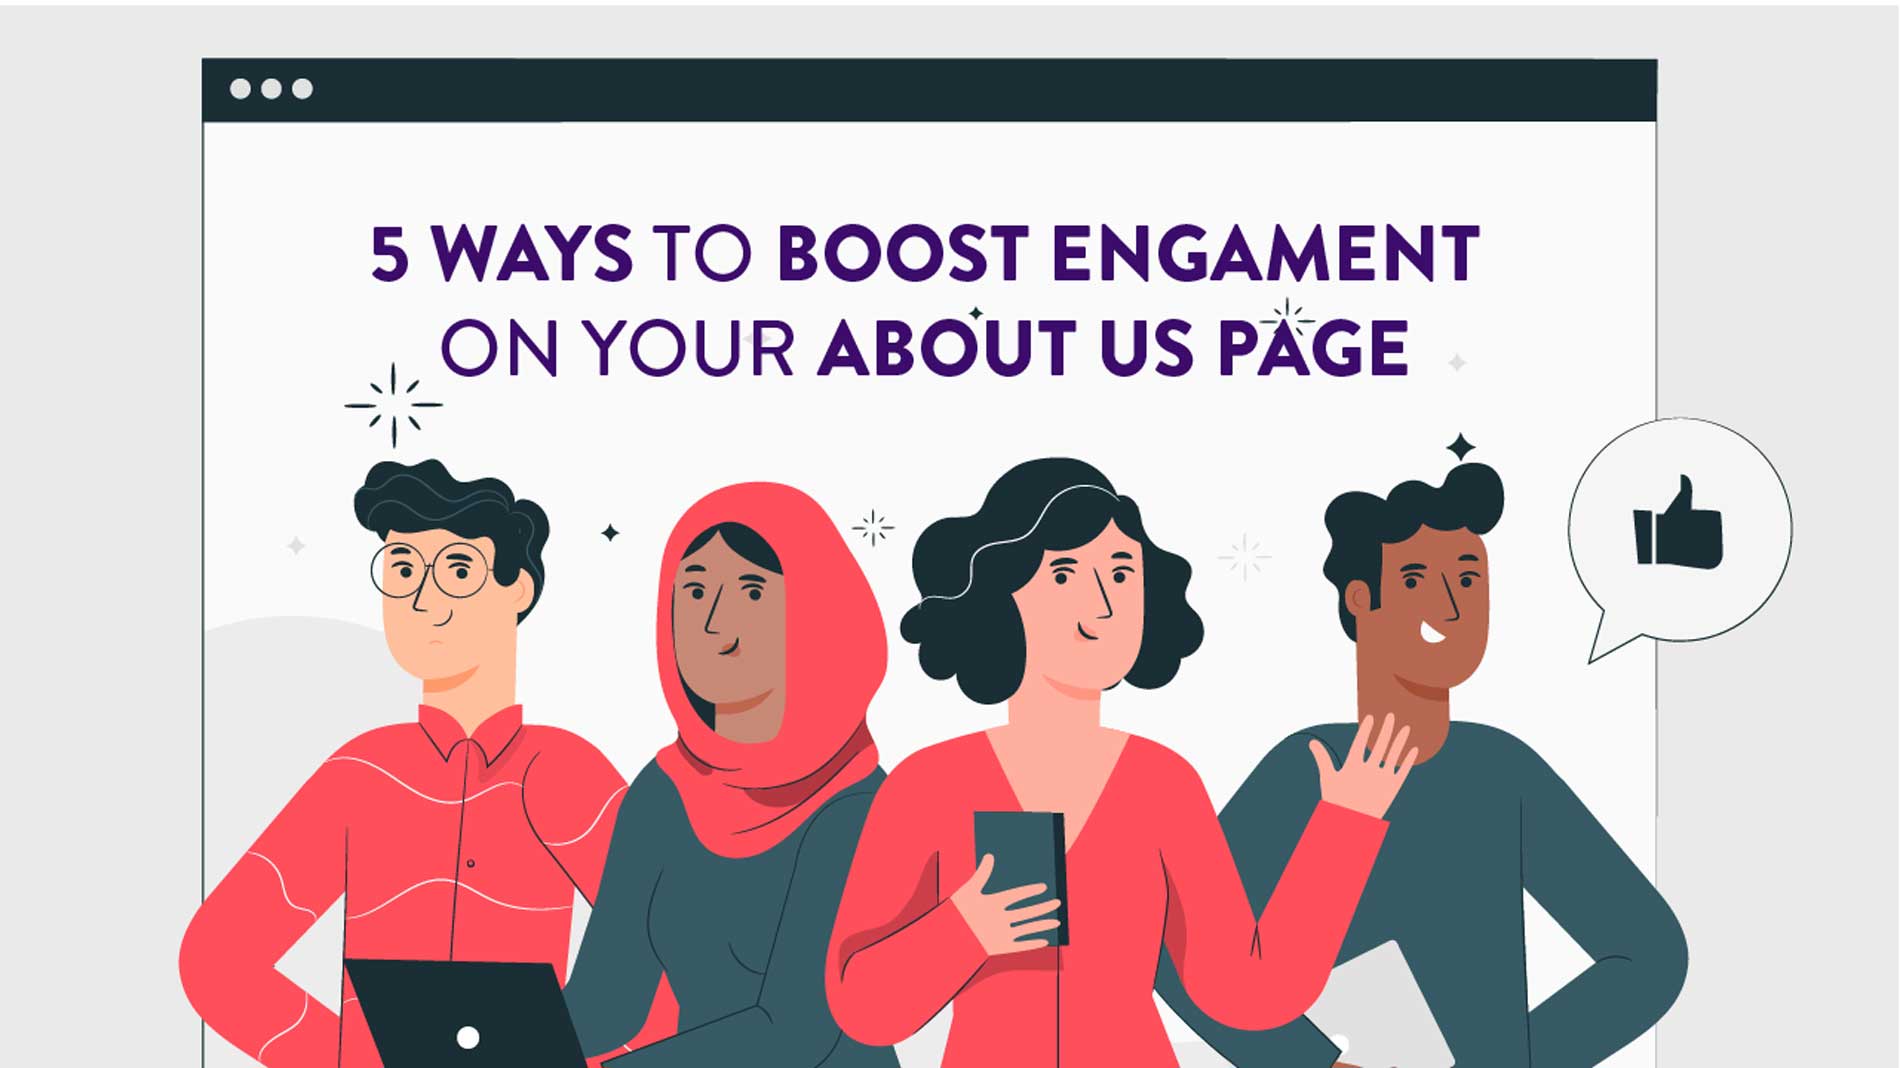 5 ways to boot engagement on your about us page